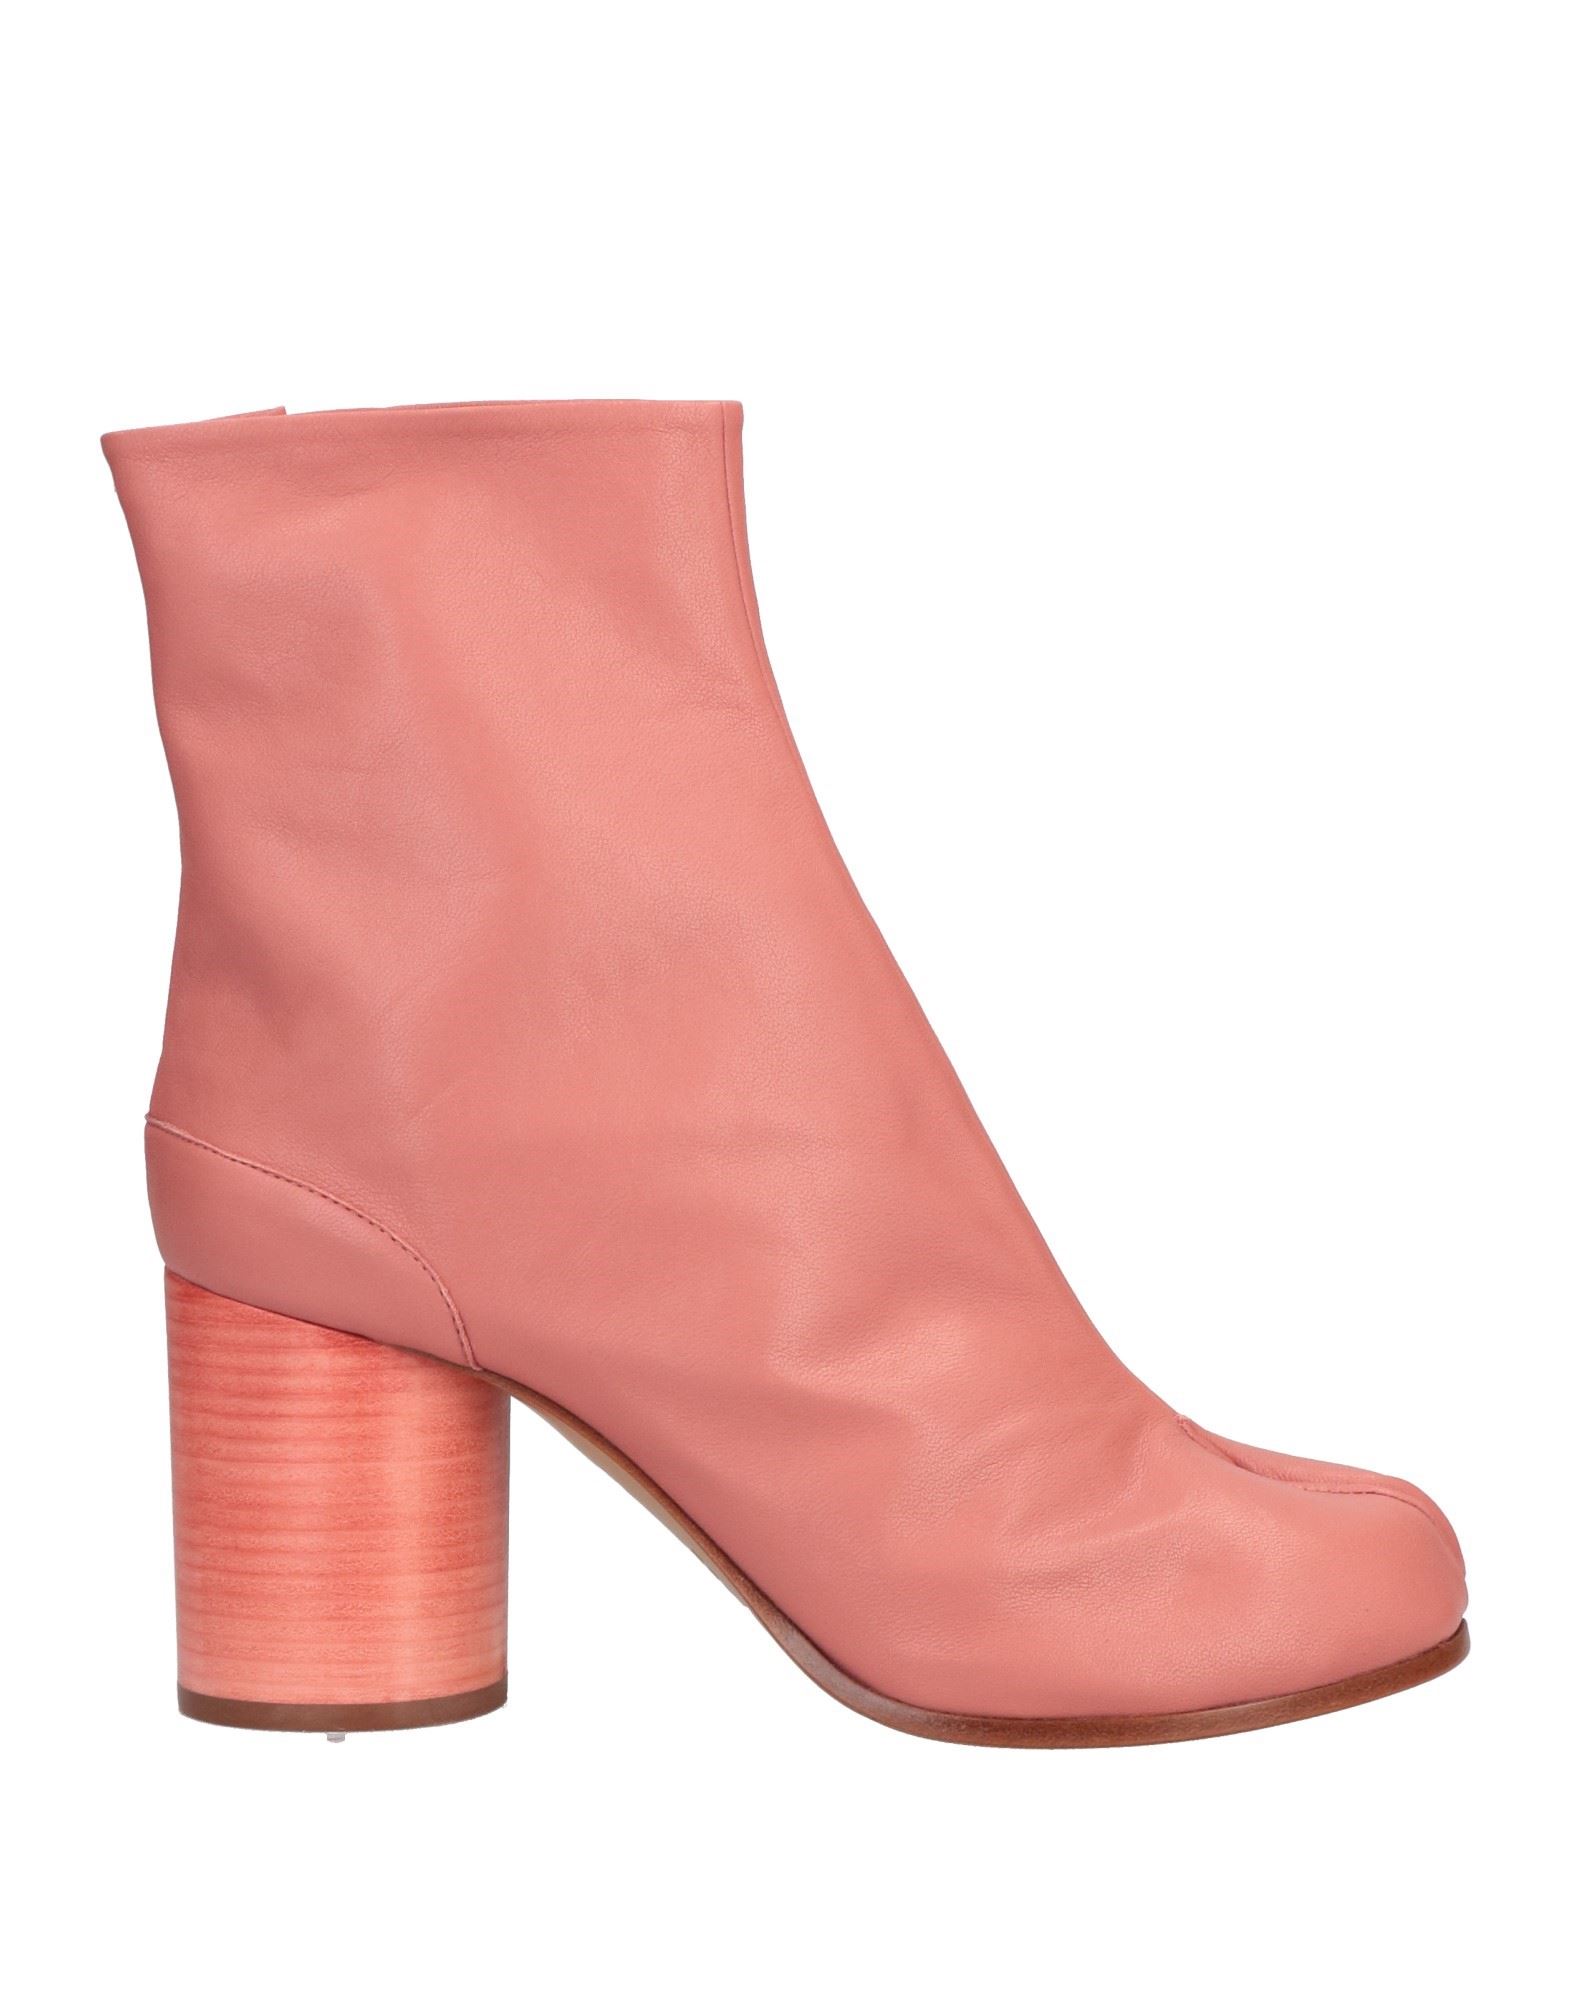 Maison Margiela Ankle Boots In Pink